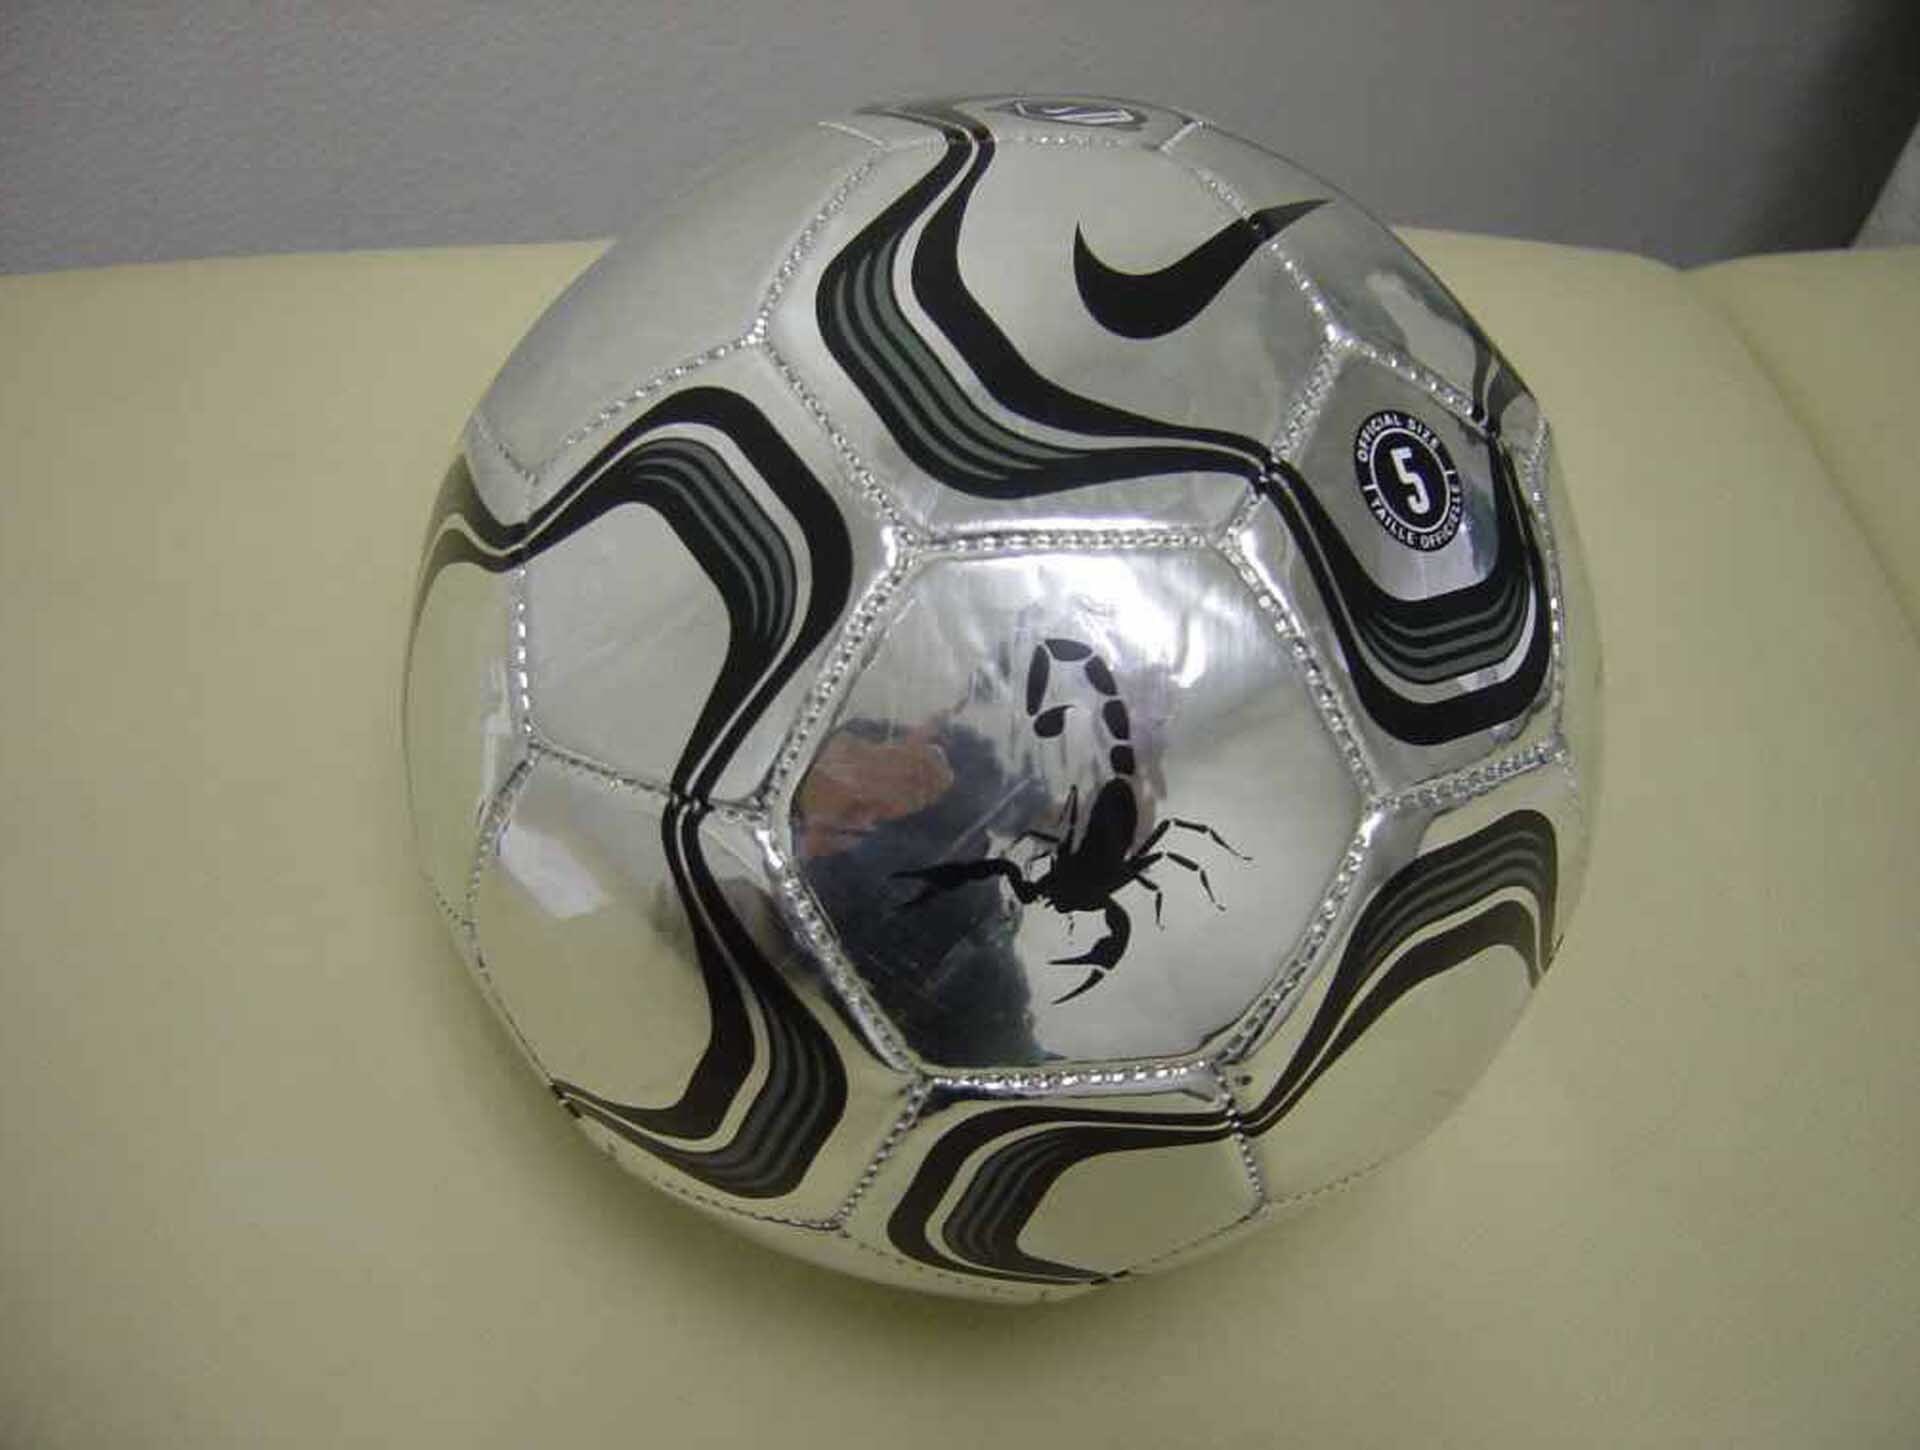 Classic Football Shirts on Twitter: "The Scorpion Strike Ball Nike have also released a ball based the original 2002 Secret Tournament version that appeared in the famous ad. https://t.co/AHStSXnkGA" / Twitter